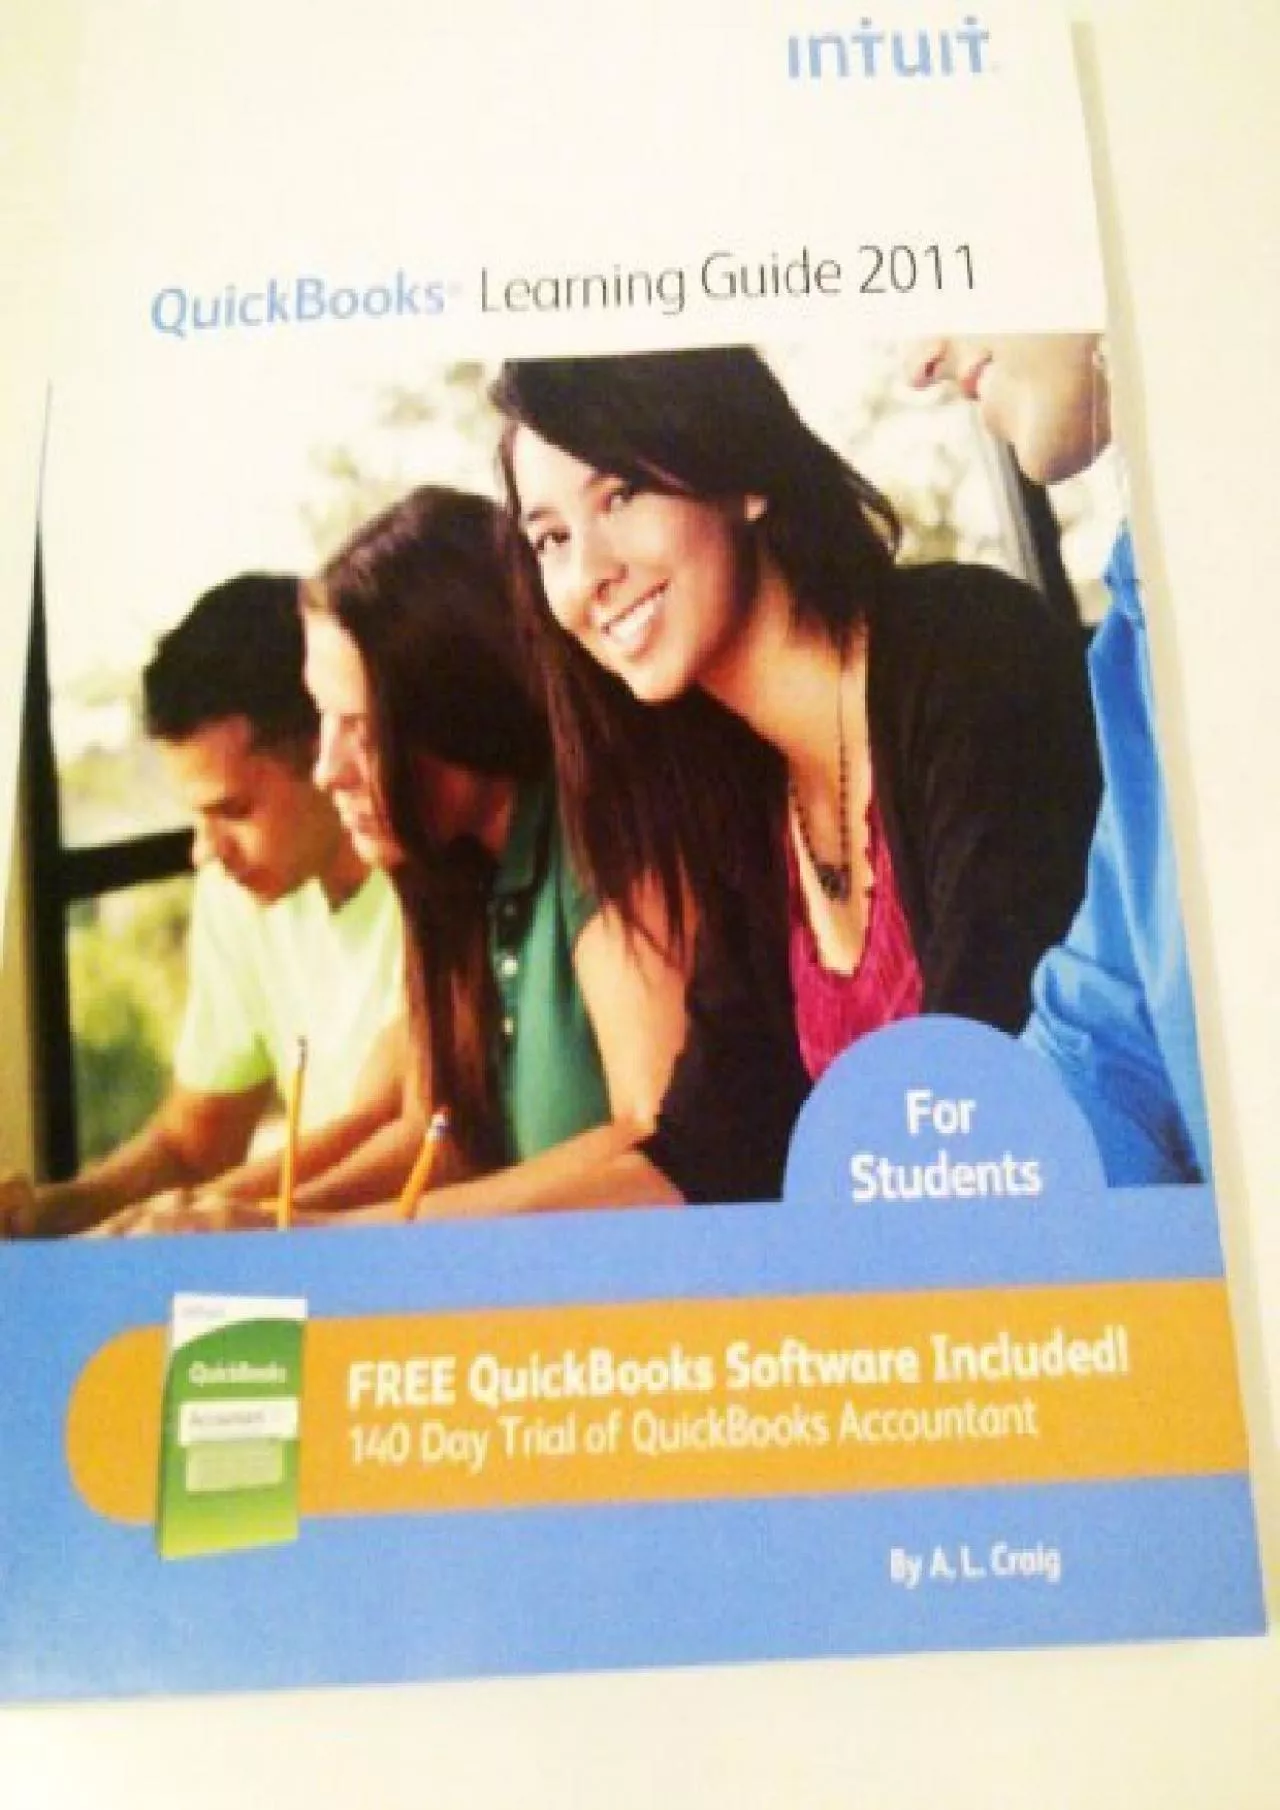 (DOWNLOAD)-QUICKBOOKS STUDENT LEARNING GU by A. L. Craig (2010) Paperback